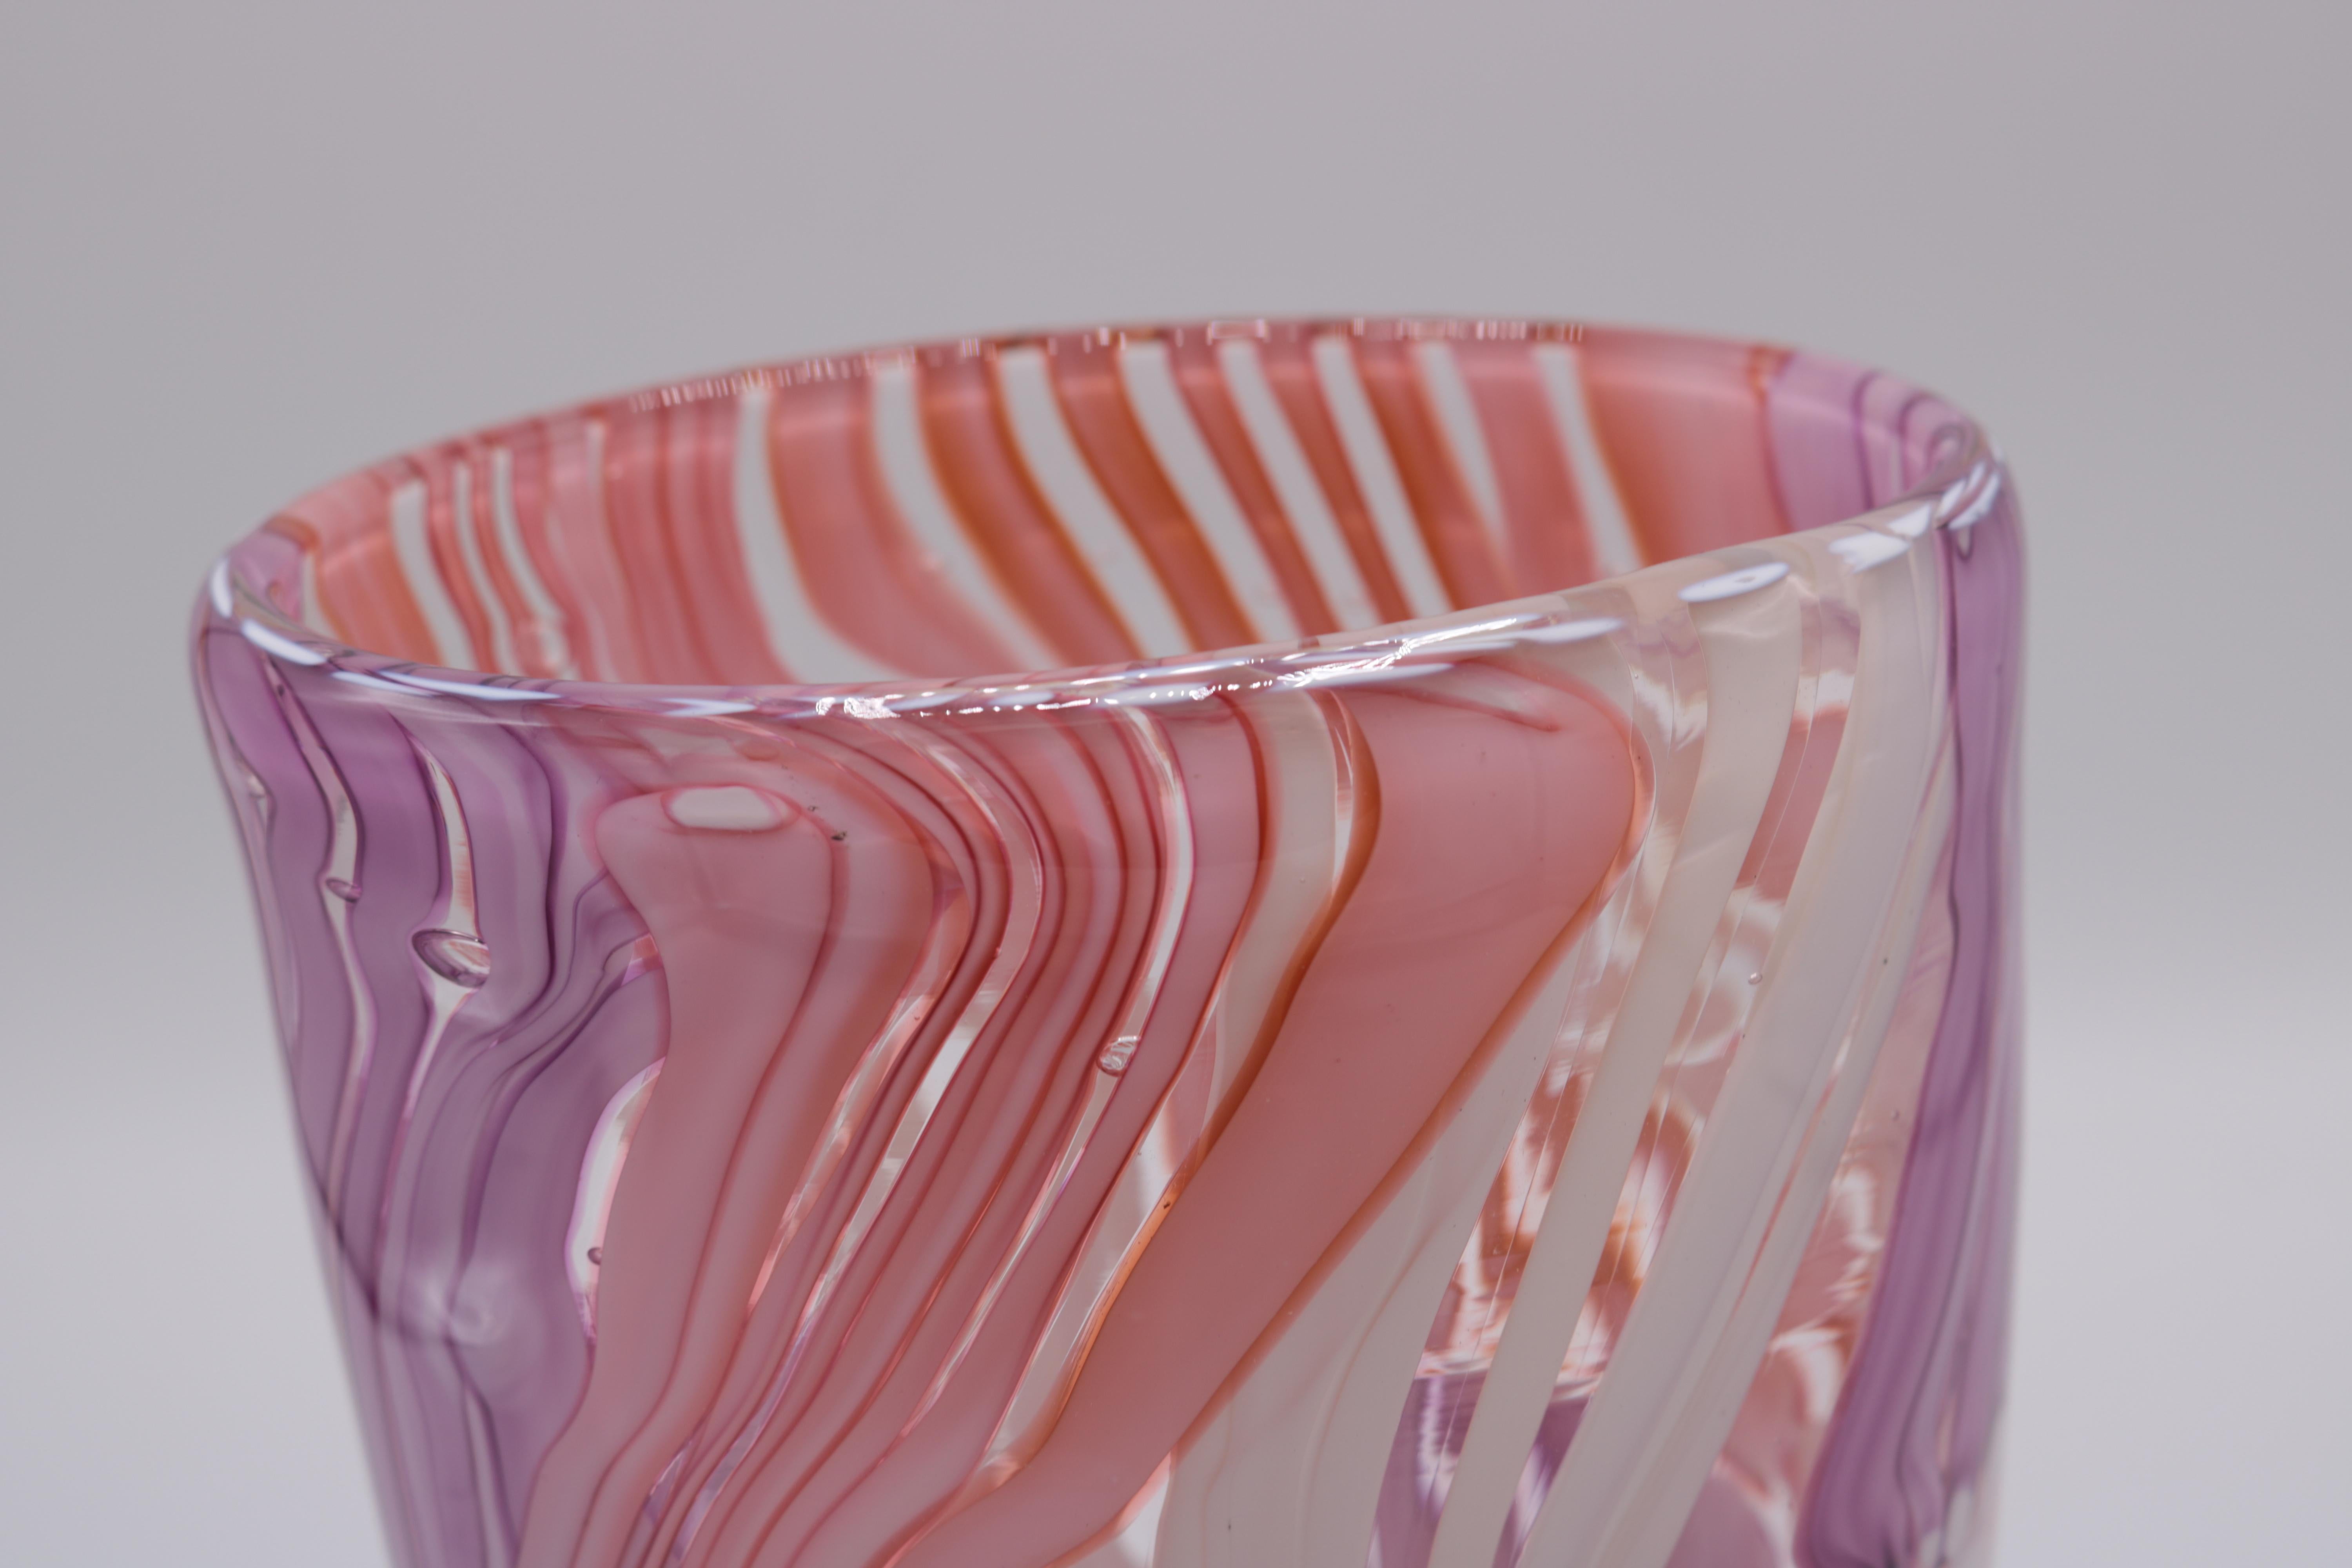 Limited edition art glass vase by Martin Postch. 
Oval shape clear glass with pink, white and purple details. 
Etched signature on the bottom.